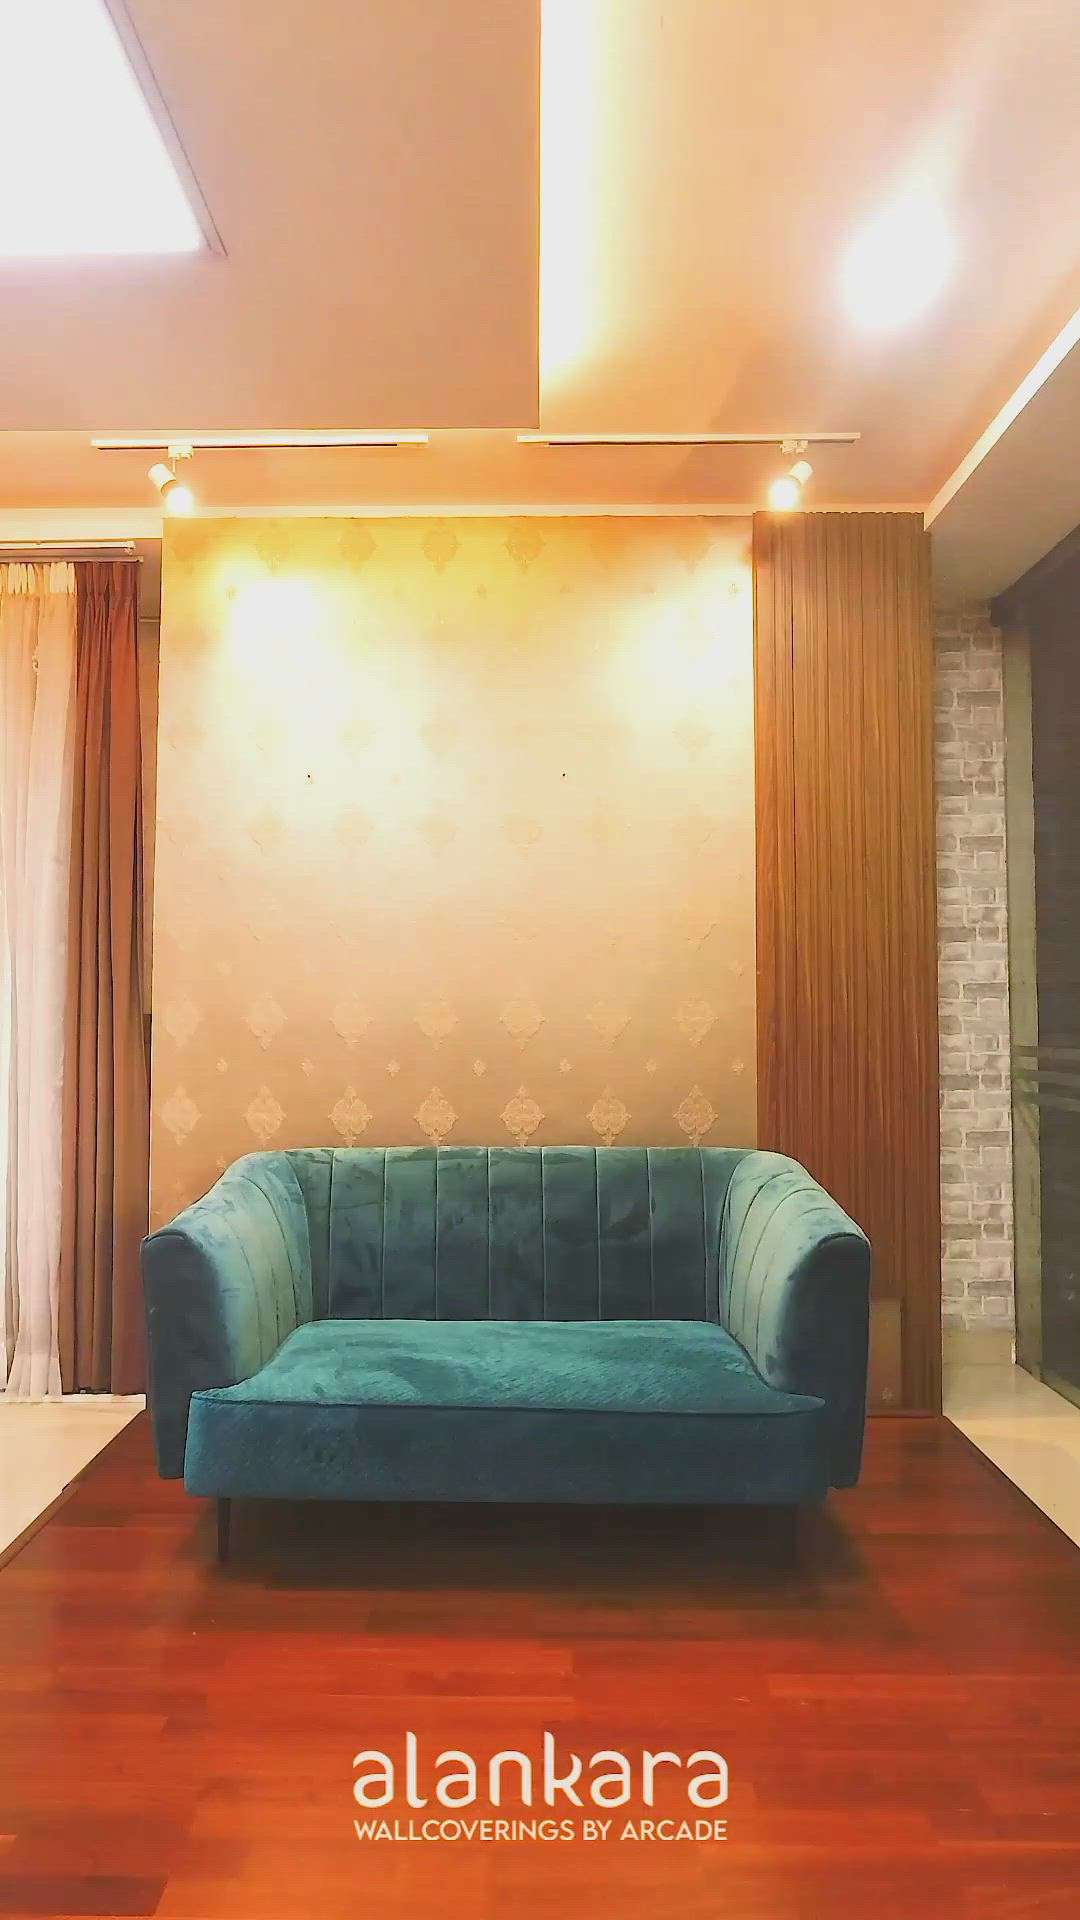 Make your boring interiors to the most lively ones with us. Everything you have ever wanted for your home is easier to do now.

Wonderful Walls. Wonderful Homes. Alankara Promise

ᴅo ᴠisit ᴏur ꜱhowroom at
Cochin
Alankara Wallcovering
Near Pulinchod Metro Station, Metro Pillar No 76, Aluva, Kochin,Kerala 683101
Ph: 8089181314,
9995340439
*
*
*
Do ᴠisit ᴏur ꜱhowroom at
Bengalore
Alankara Wallcovering
8/9 First Floor, Oppo Mahaveer Ranches, Hosa Road, Bengalore 560100
Ph: 8129773421,
9995340439

 #Sofas #LivingRoomSofa